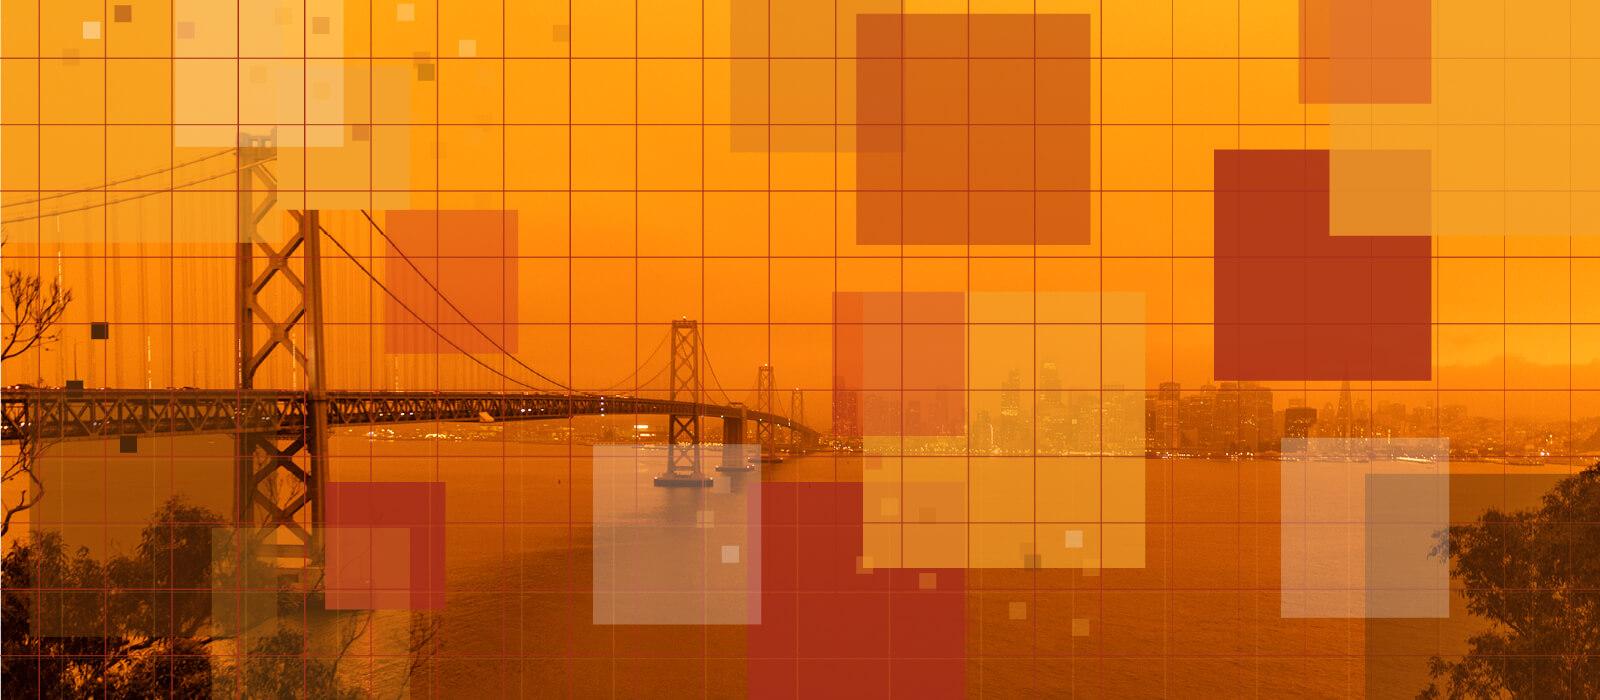 distant view of golden gate bridge with colorful blocks overlay